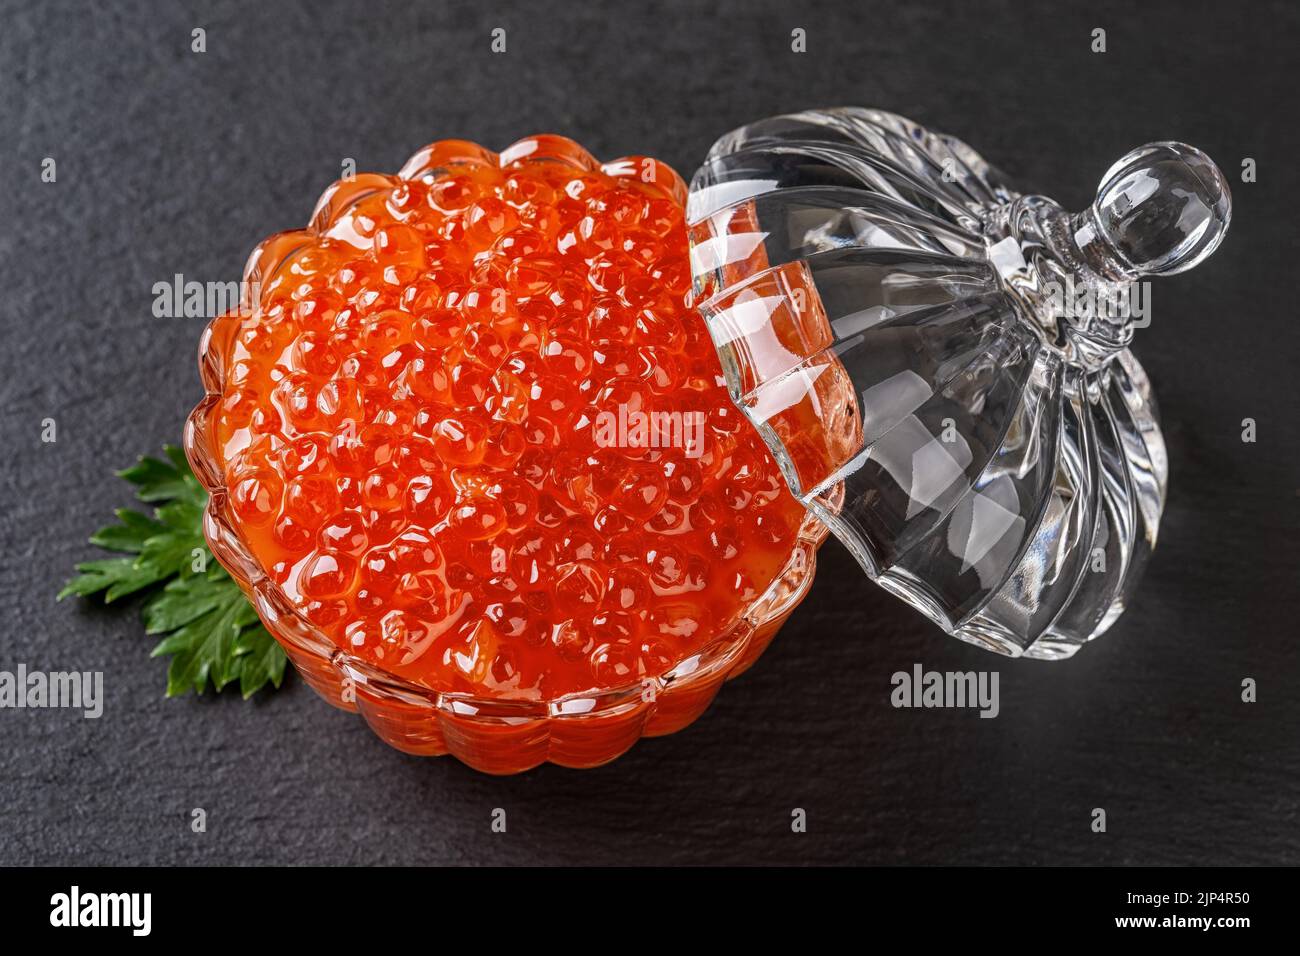 Salmon caviar in a crystal bowl with lid over black background. Glass dish full of chum red caviar closeup. Salted salmon roe for gourmet food concept Stock Photo